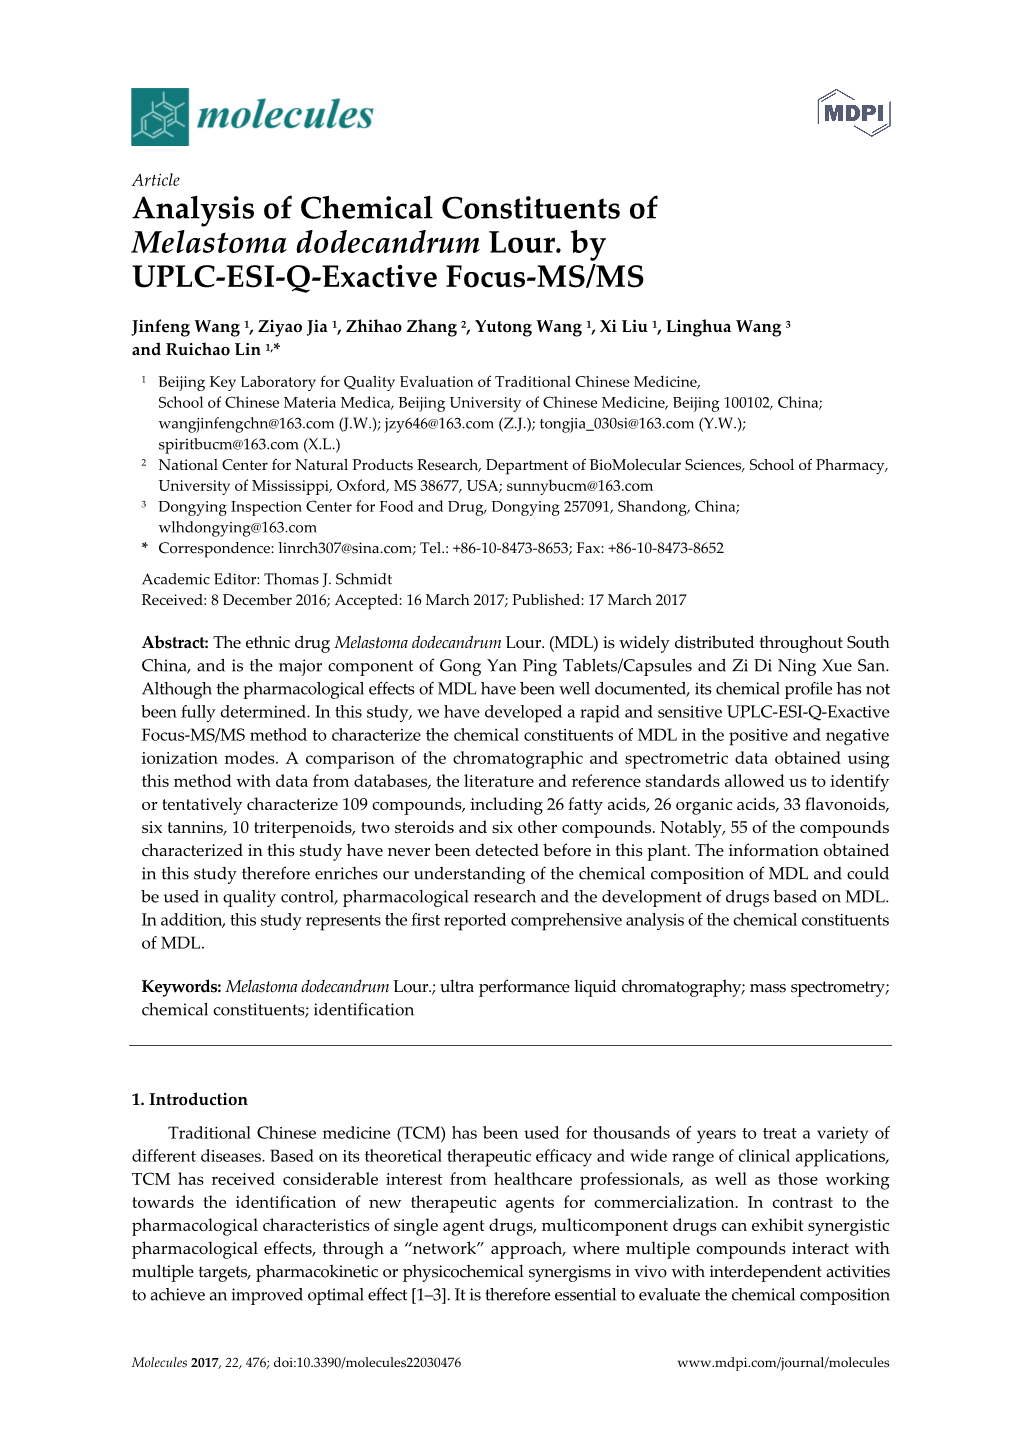 Analysis of Chemical Constituents of Melastoma Dodecandrum Lour. by UPLC-ESI-Q-Exactive Focus-MS/MS